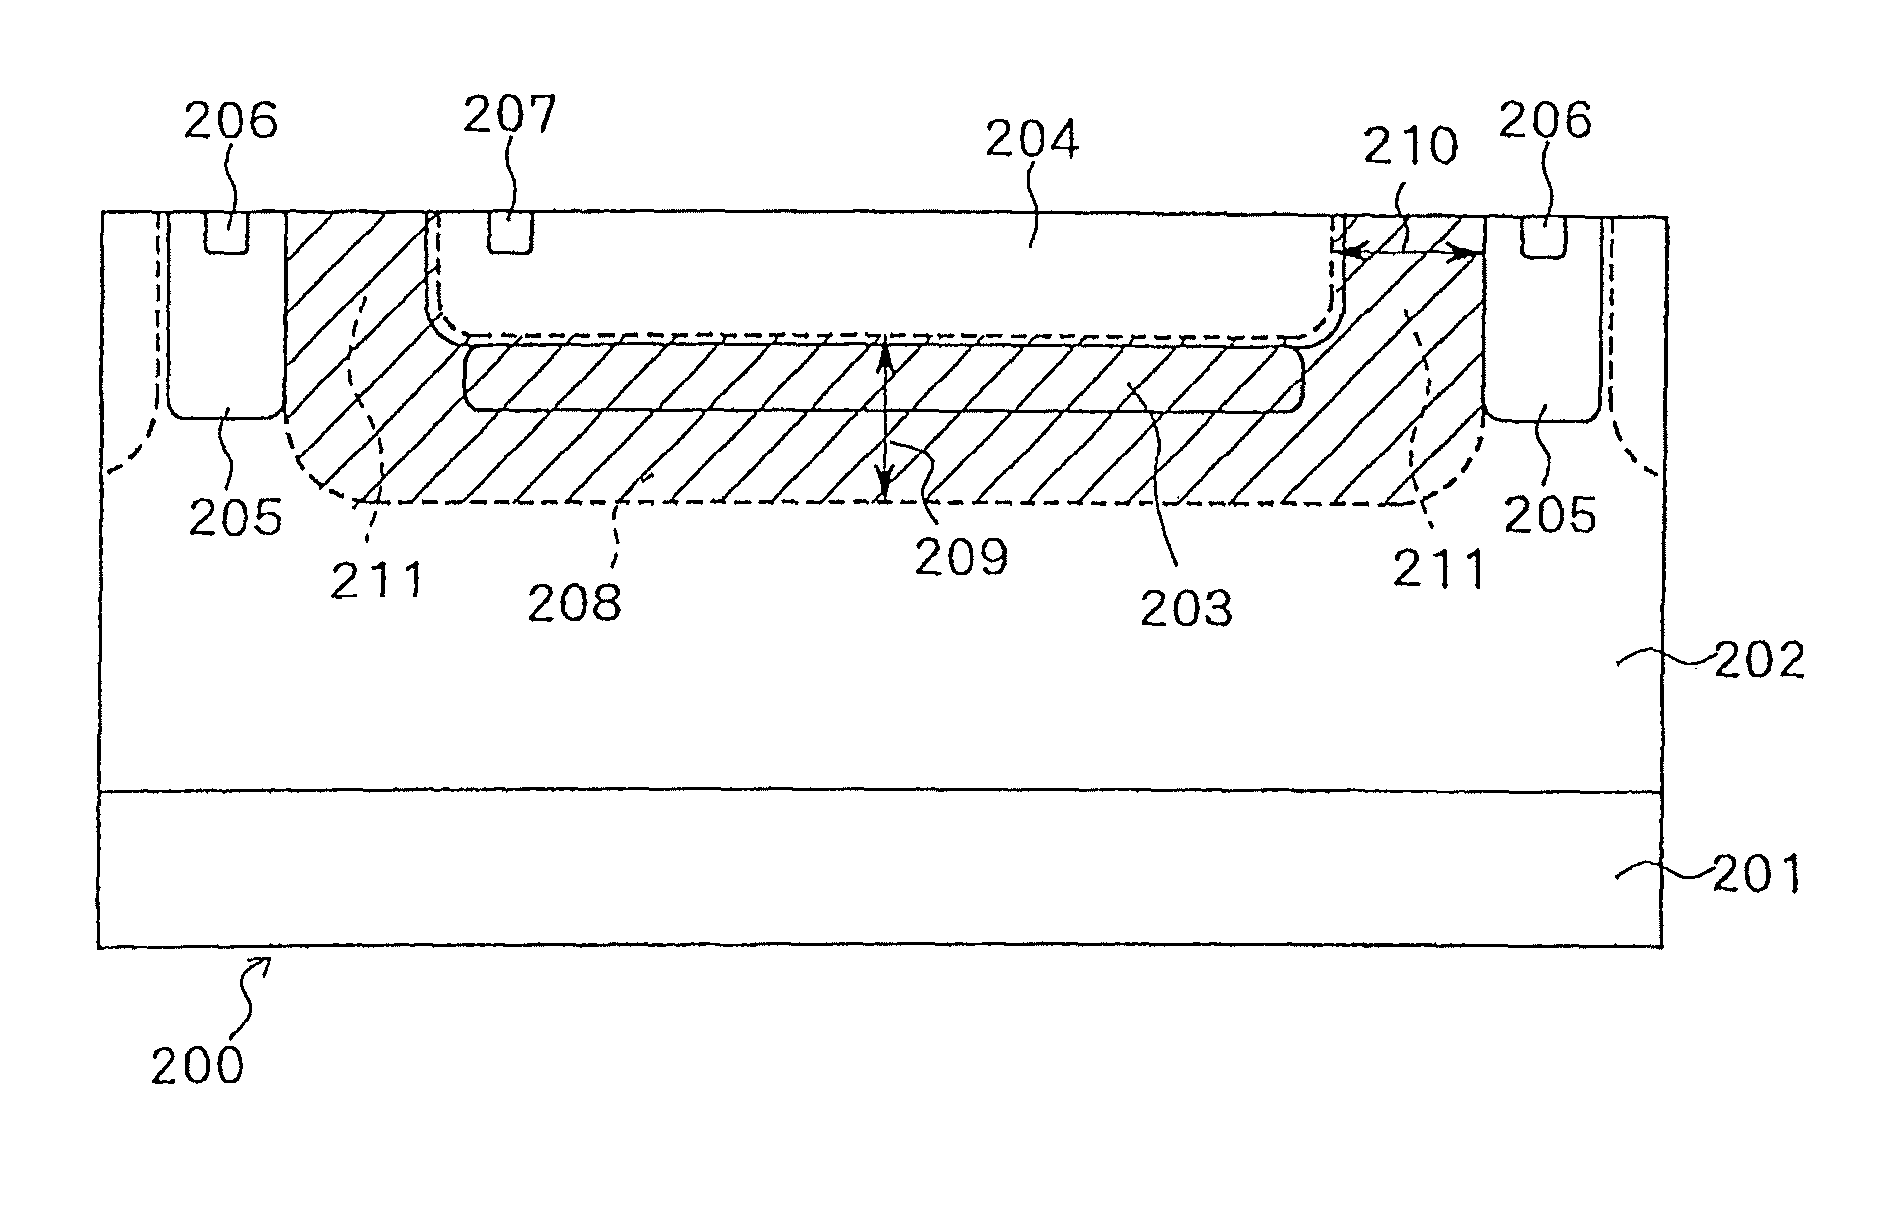 Single photon avalanche diode with second semiconductor layer burried in epitaxial layer